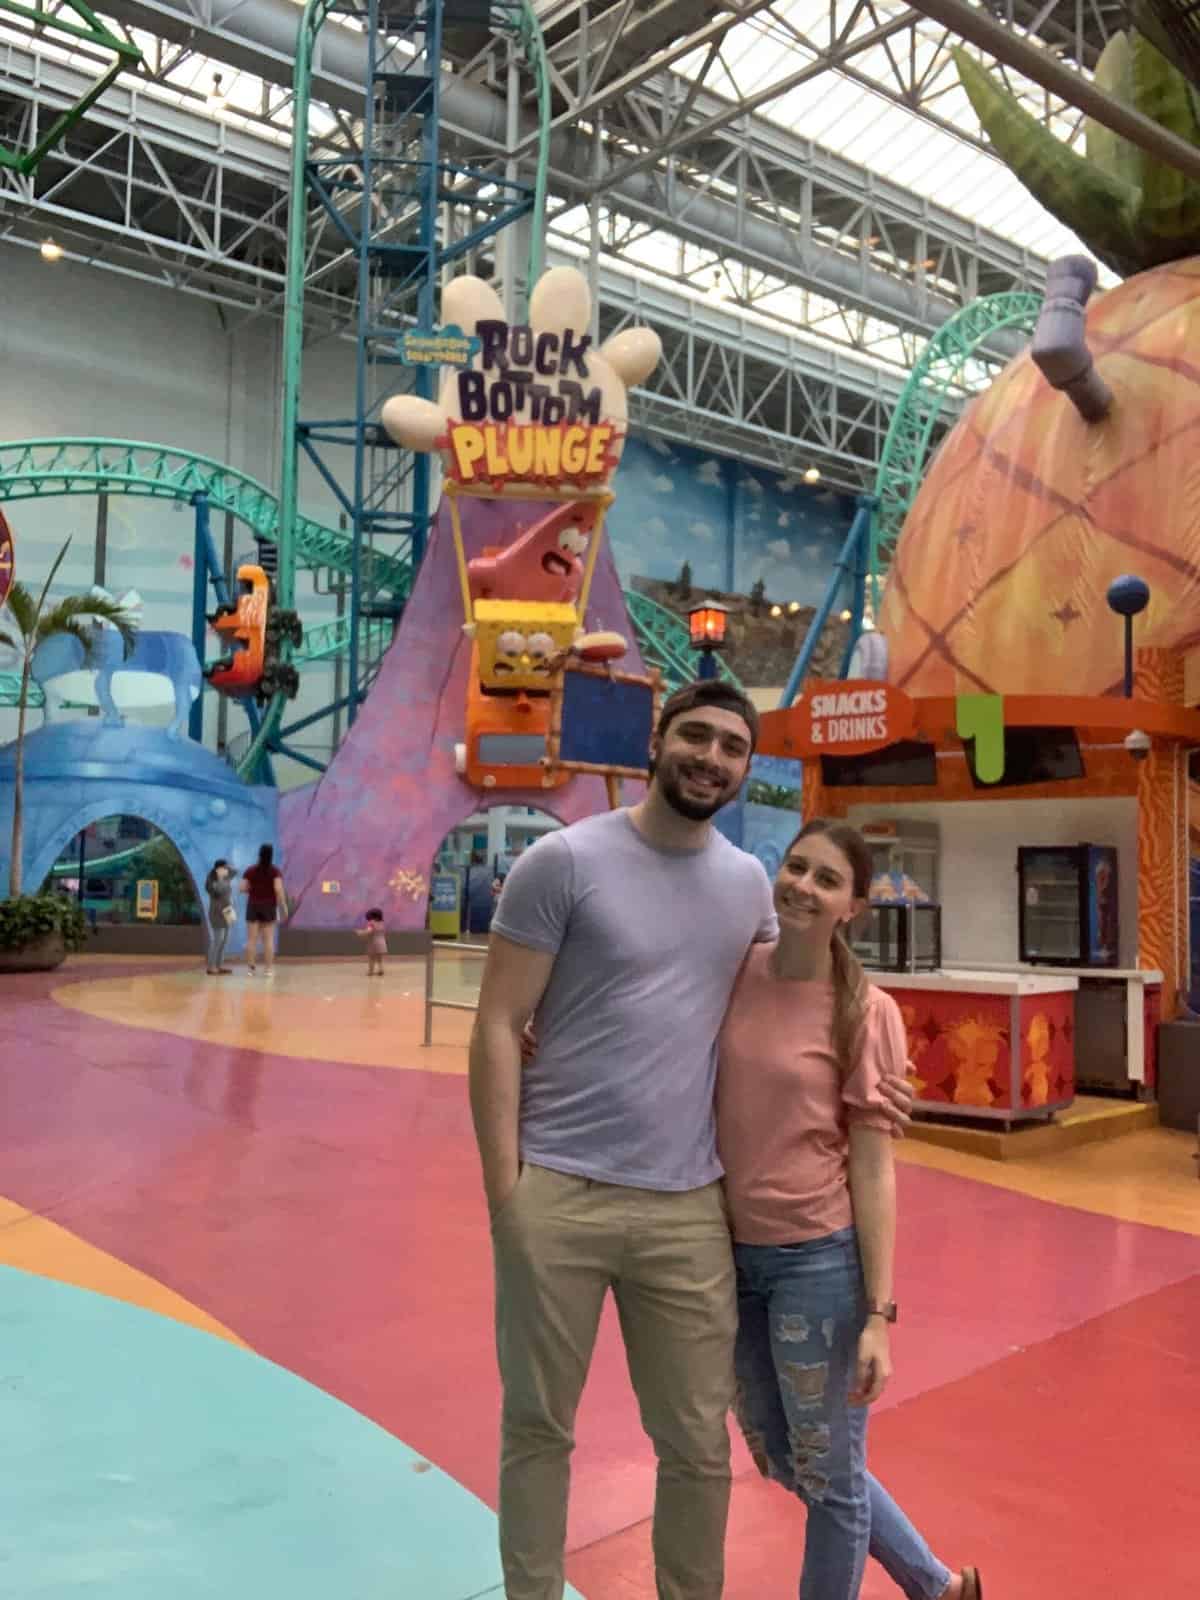 A man and woman posing at the amusement park in the Mall of America.